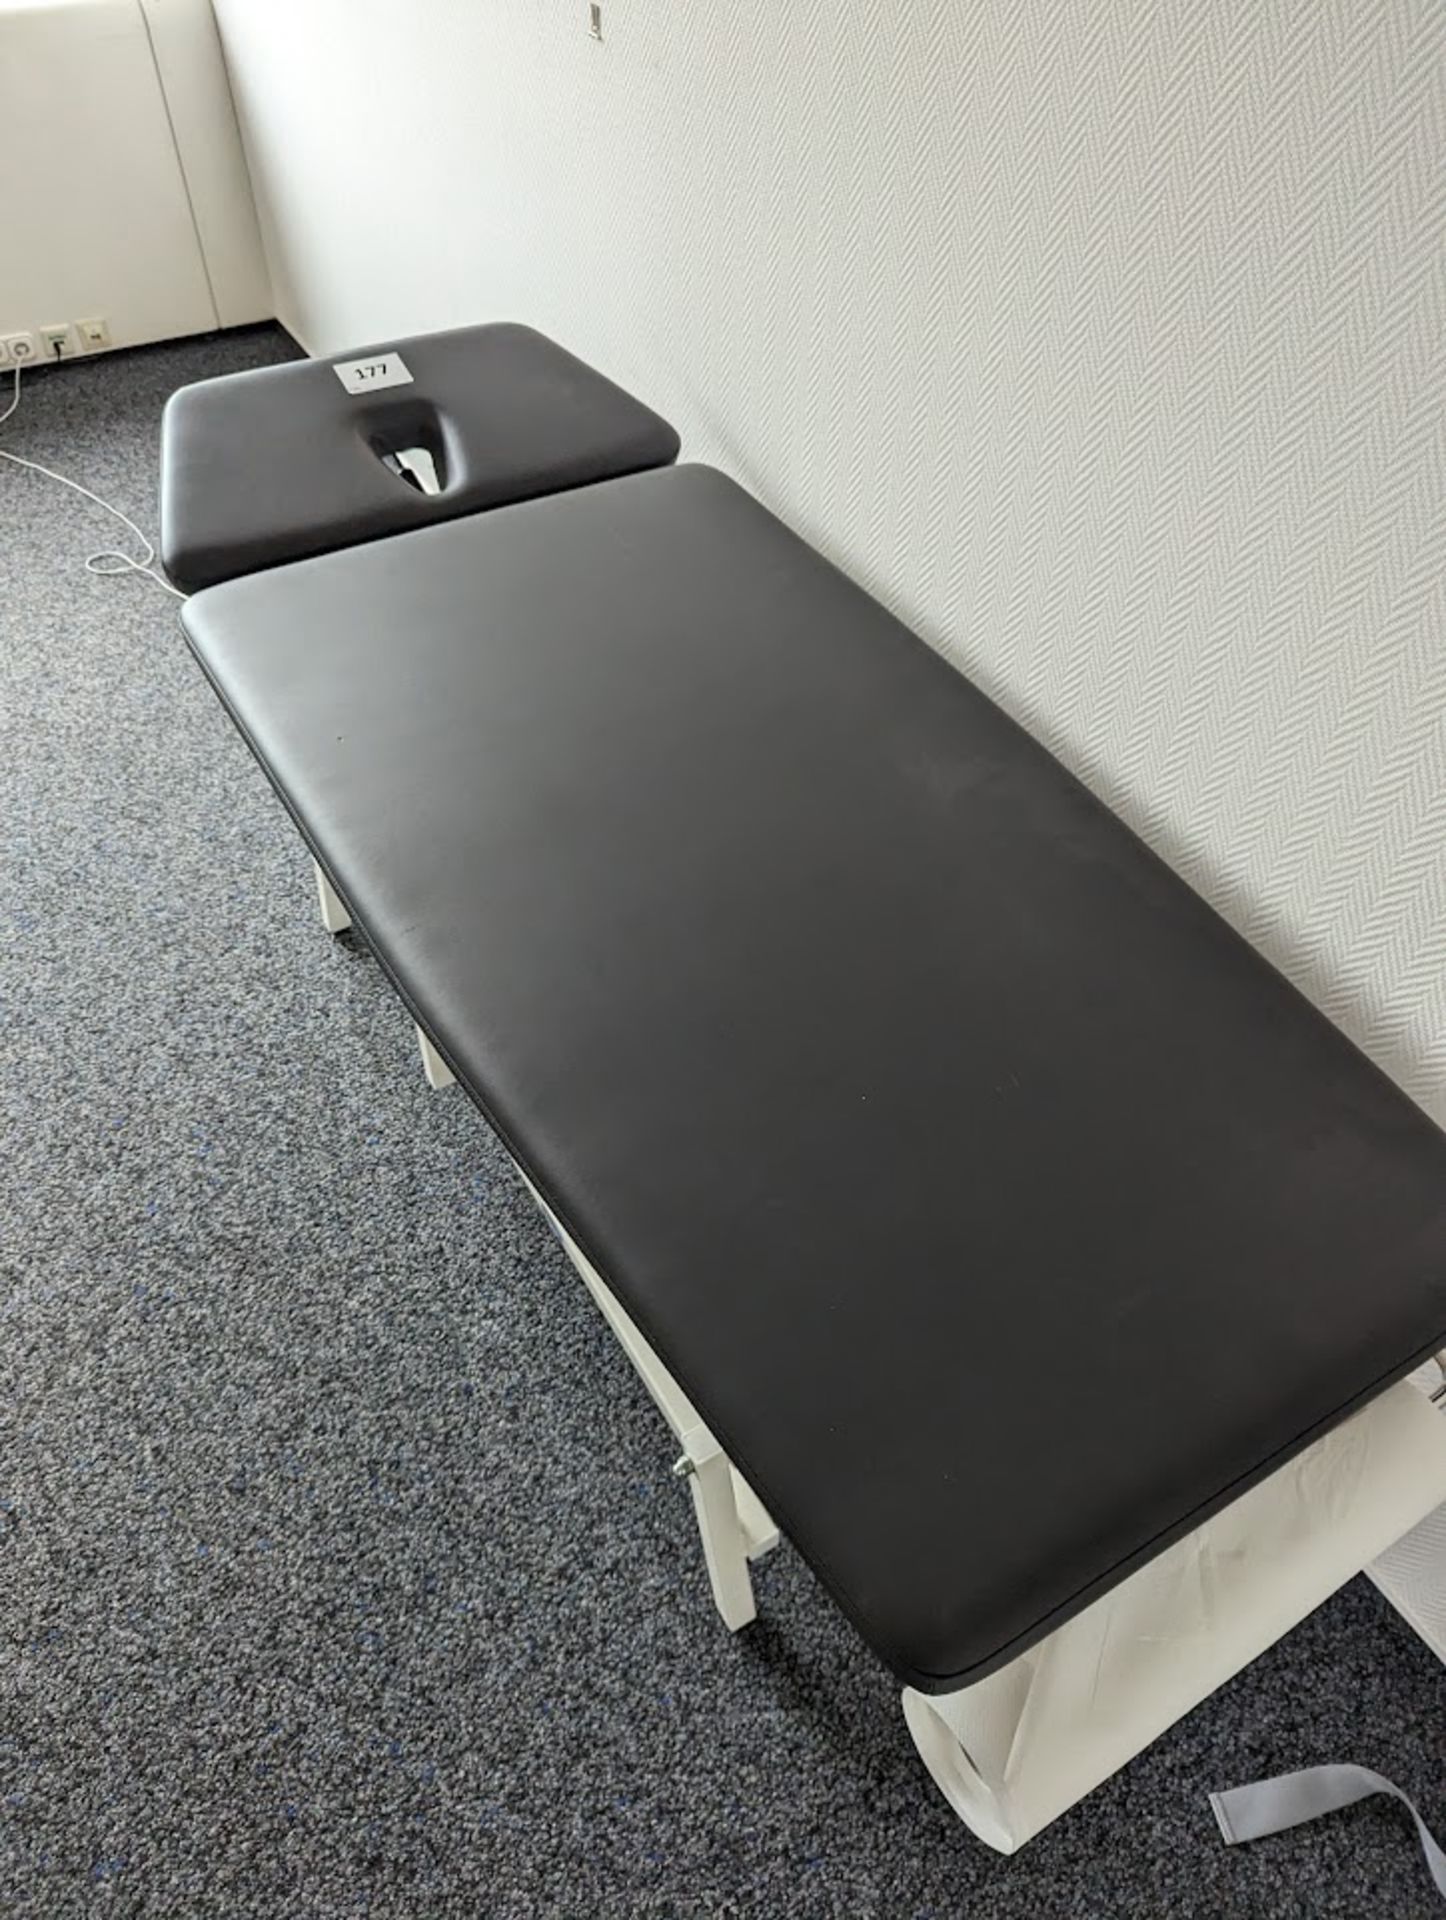 HK Medizintechnik X60221290 Physio Bed with Powered Back Lift, Serial No. 08004973 - Image 2 of 3